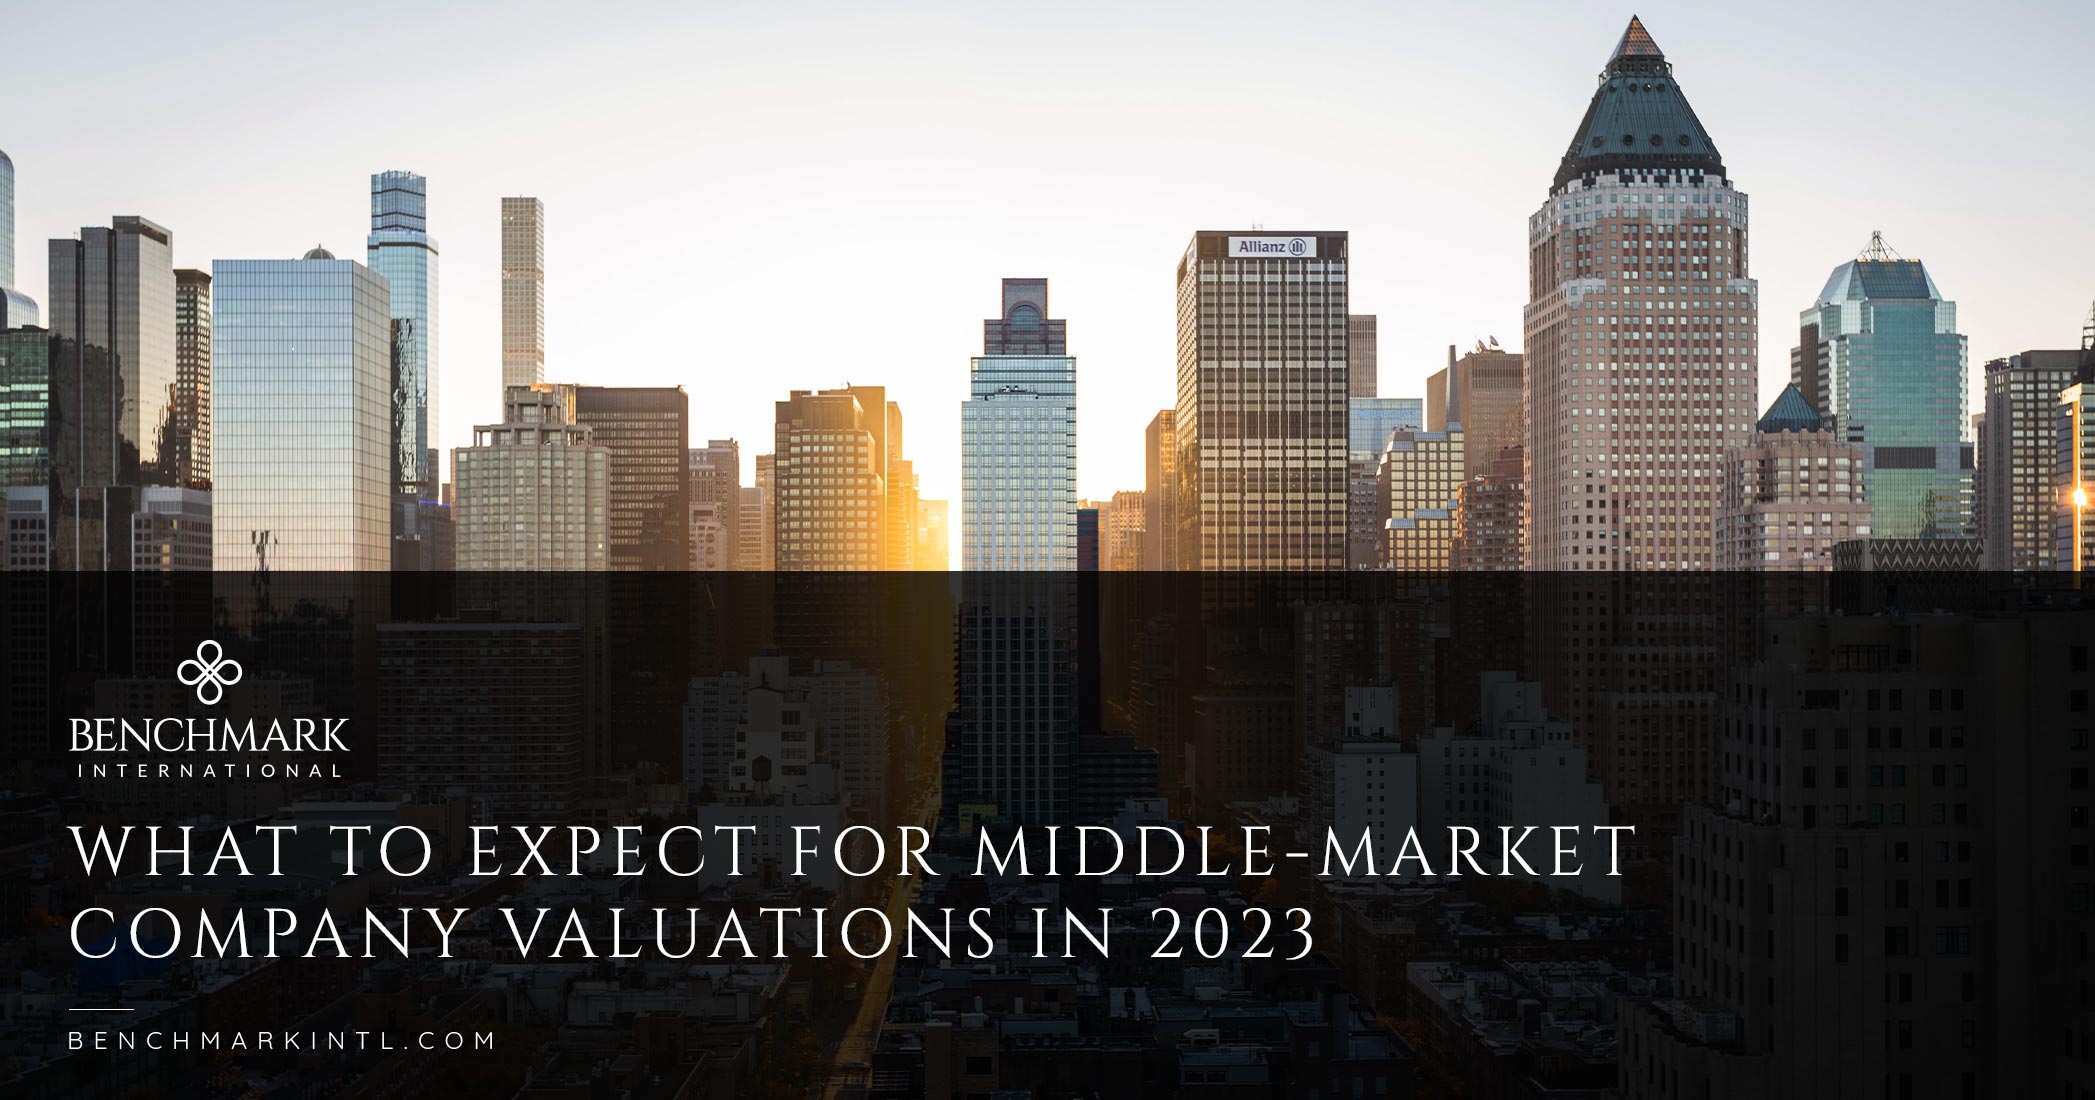 What To Expect For Middle-market Company Valuations In 2023